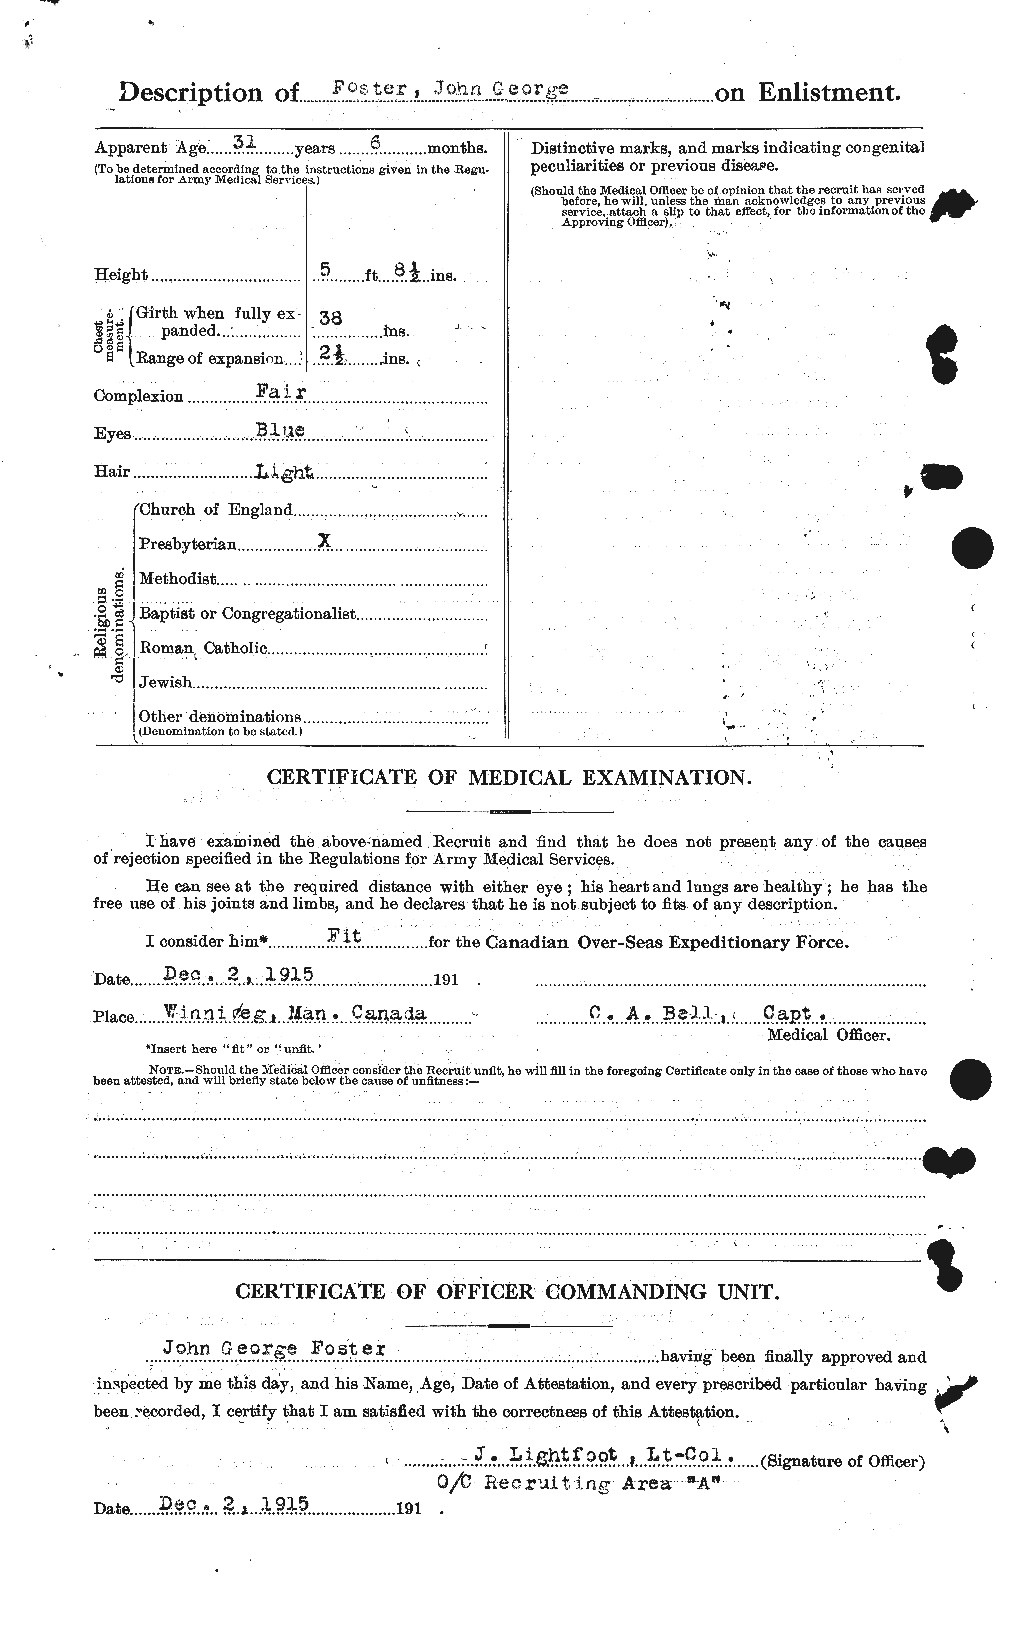 Personnel Records of the First World War - CEF 333361b